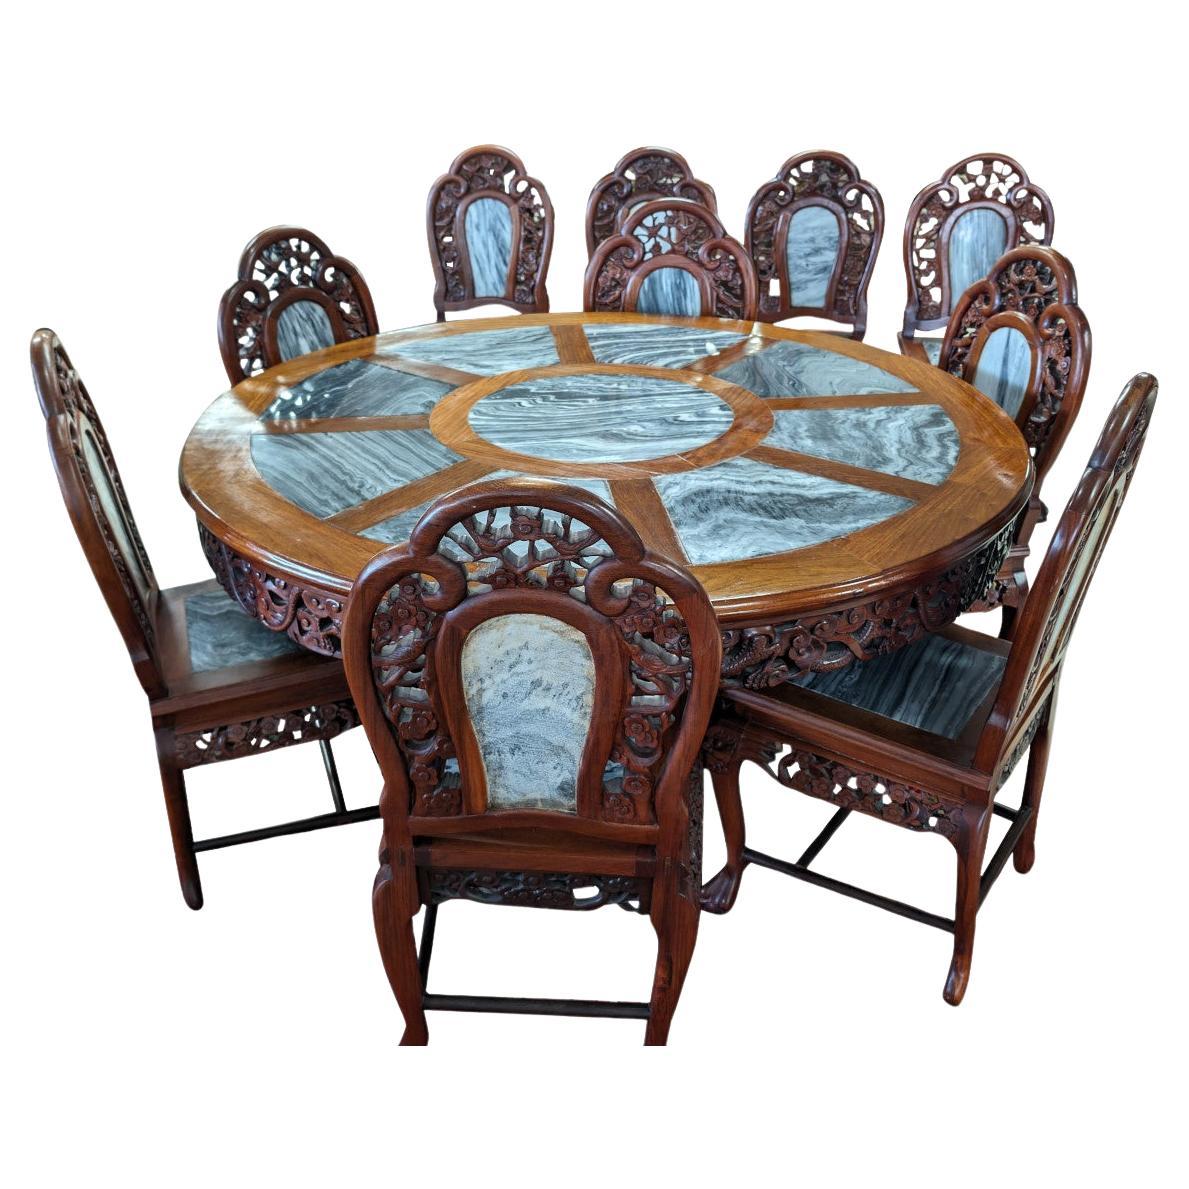 Vintage Stone Inlay Dining Table, 10 Chairs For Sale